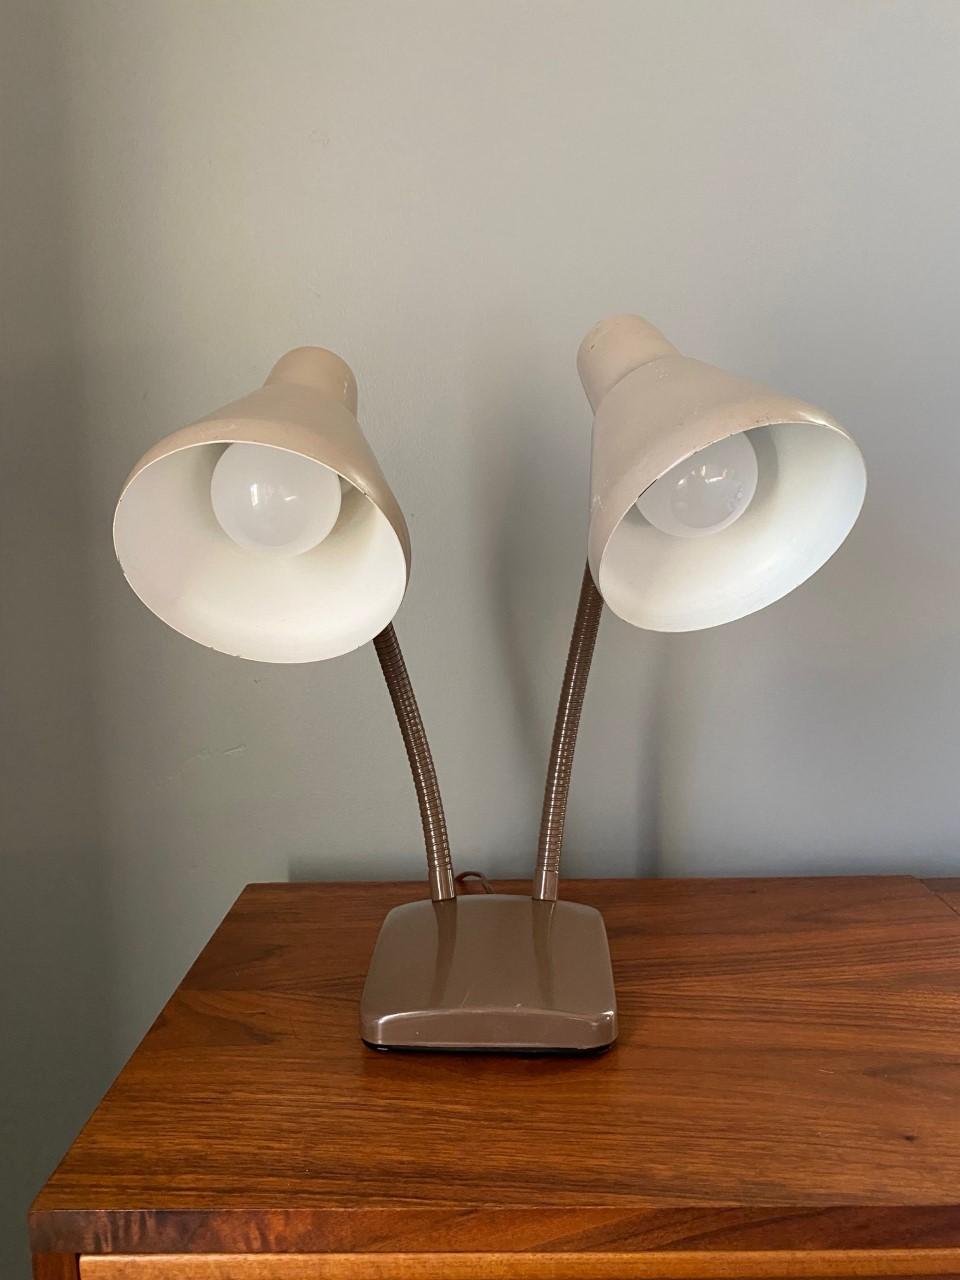 Vintage mid century double gooseneck desk lamp
Incredibly chic desk lamp that projects a minimal and streamline form. The stylish double gooseneck allows for a generous range of adjustment and the reflector shade, fitted with two bulbs, provides